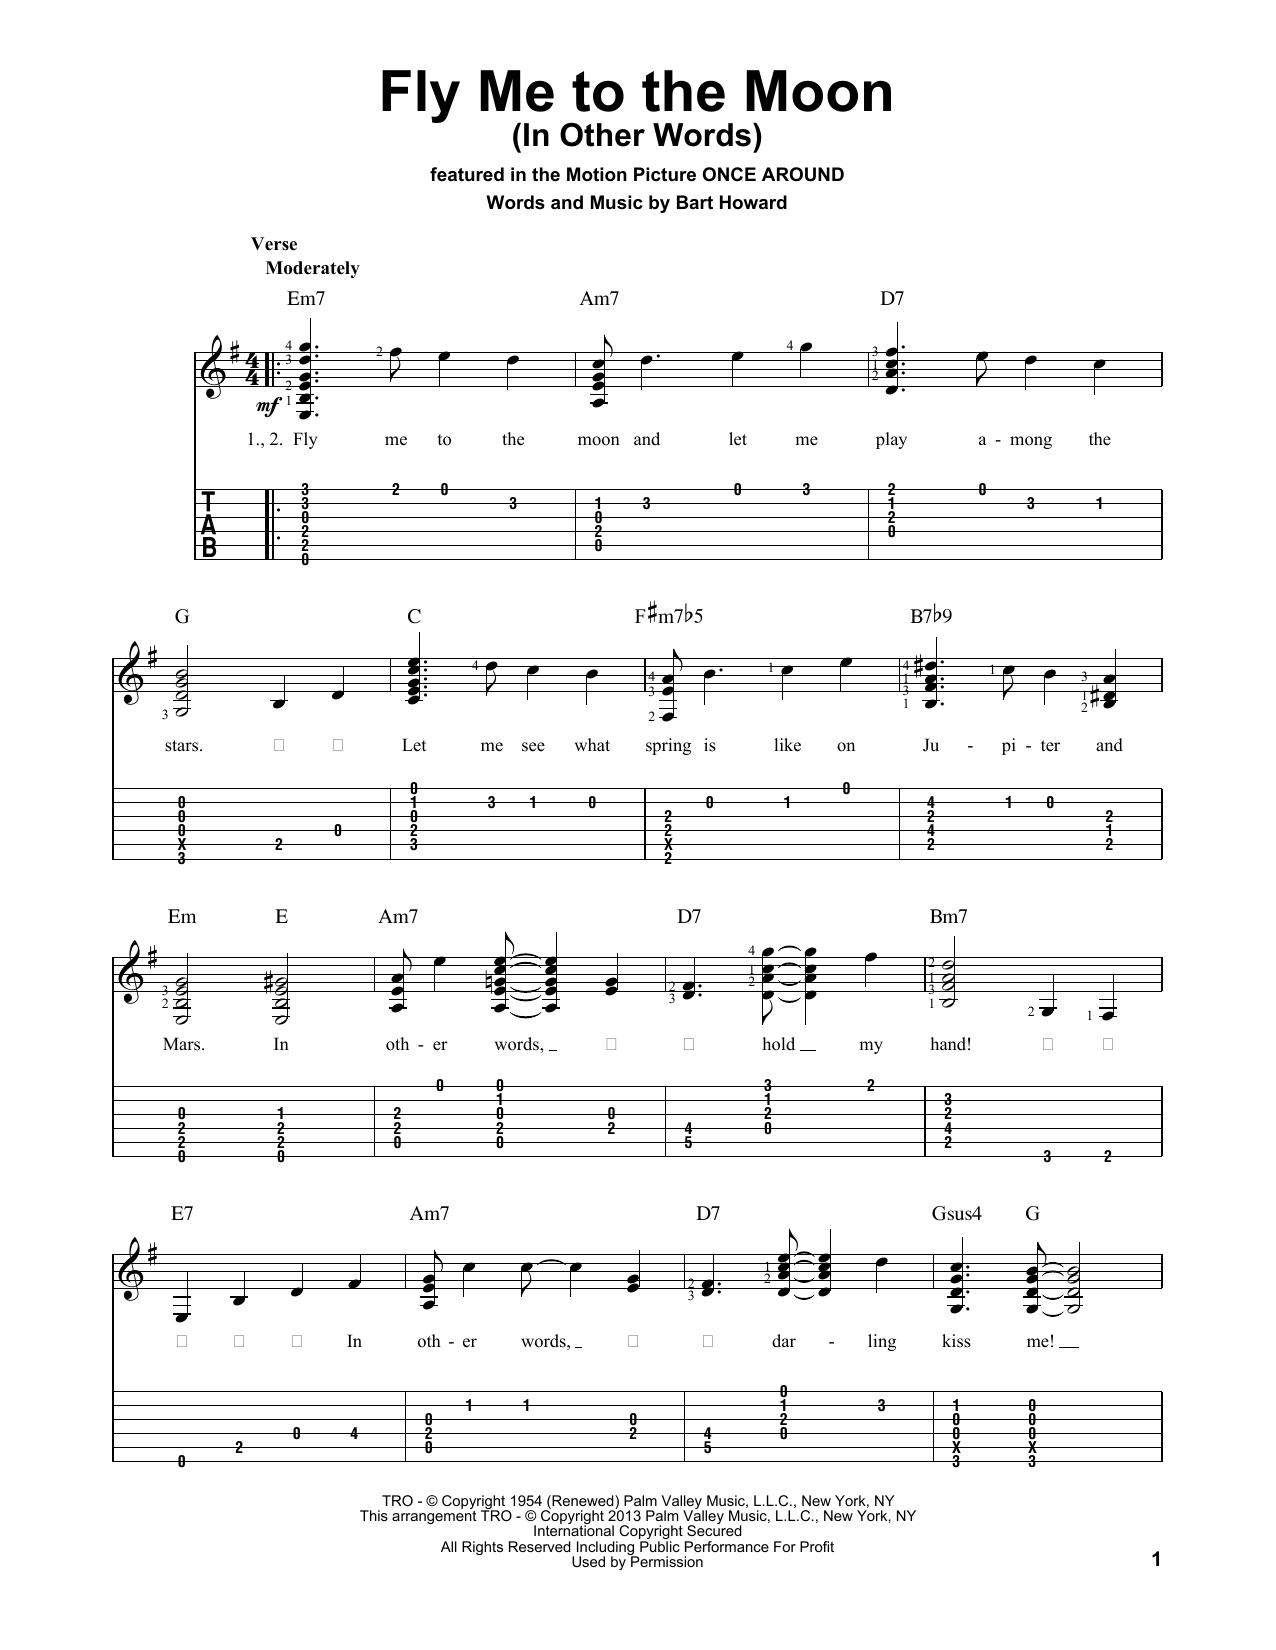 svært Gentagen pinion Tony Bennett "Fly Me To The Moon (In Other Words)" Sheet Music PDF Notes,  Chords | Jazz Score Guitar Tab Download Printable. SKU: 97045